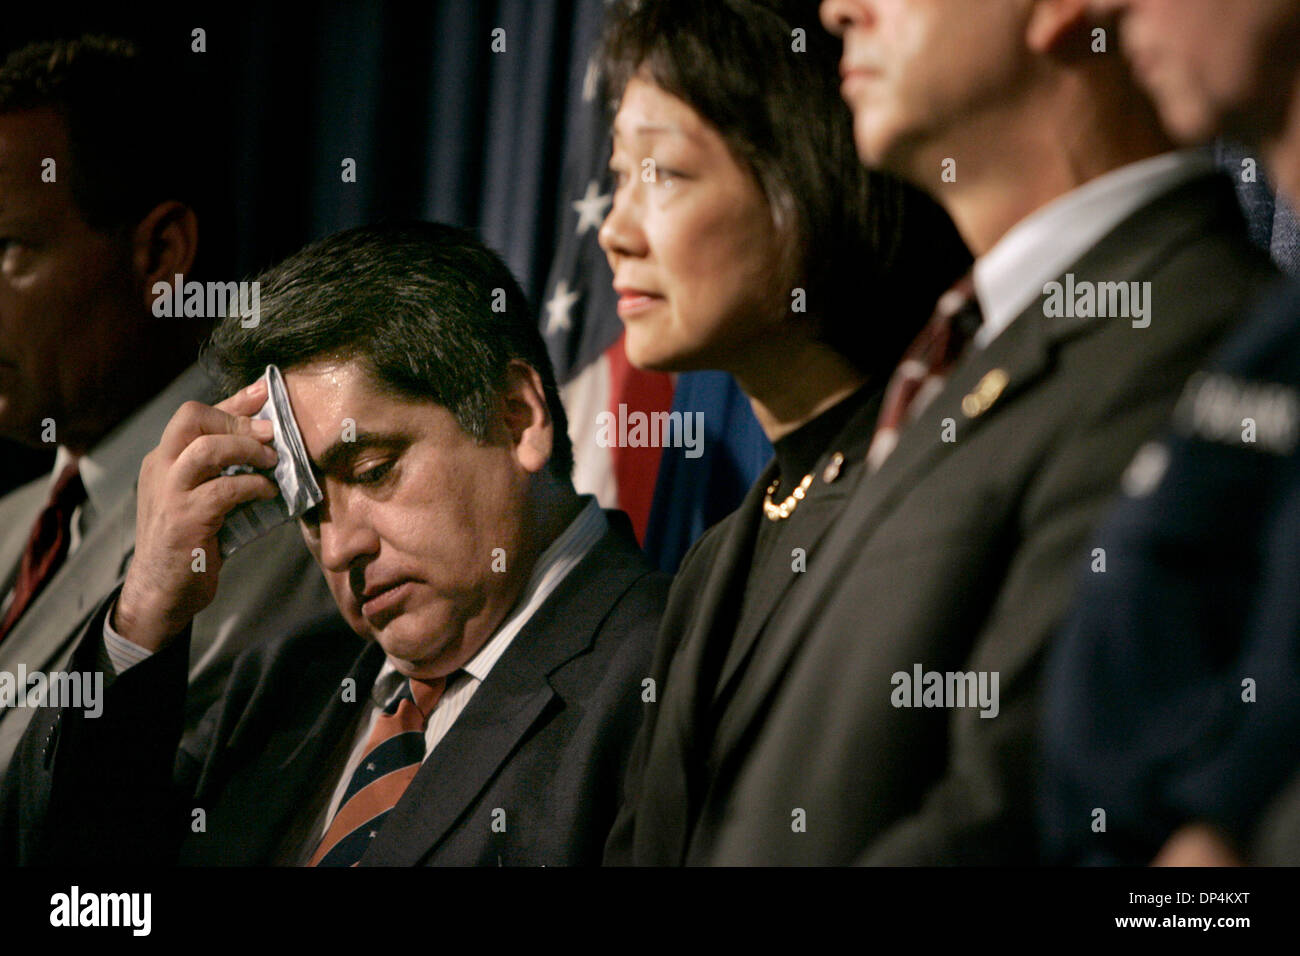 Aug 17, 2006; San Diego, CA, USA; Mexico's Deputy Attorney General JOSE LUIS SANTIAGO VASCONCELOS, left, wipes his brow as he, US Attorney CAROL LAM and other Mexican and US officials answer reporters questions at a press conference discussing the arrest on Monday August 14, 2006 in international waters off Baja California of  Francisco Javier Arellano Felix, the kingpin of the Are Stock Photo